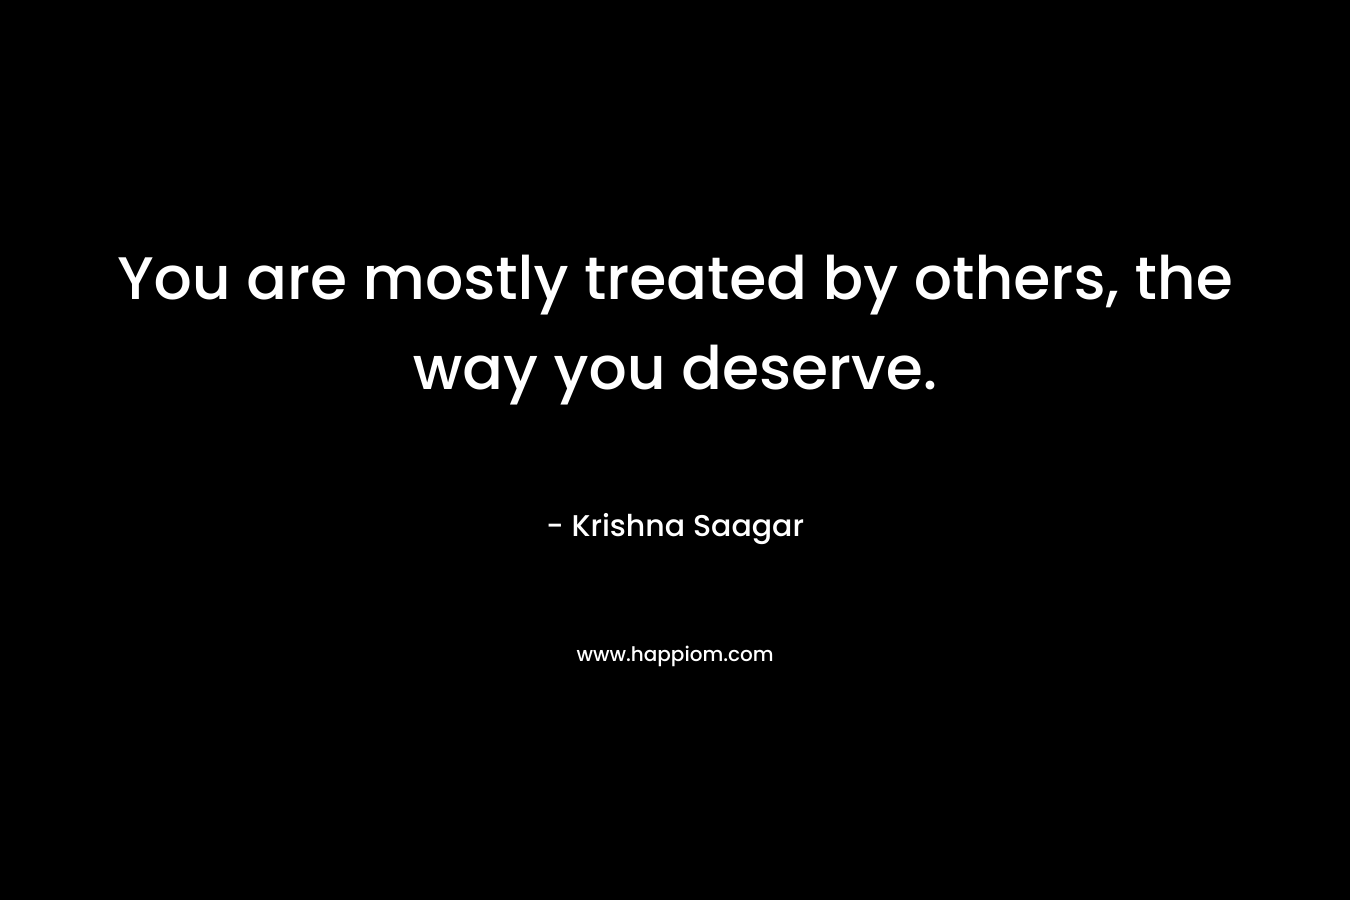 You are mostly treated by others, the way you deserve.